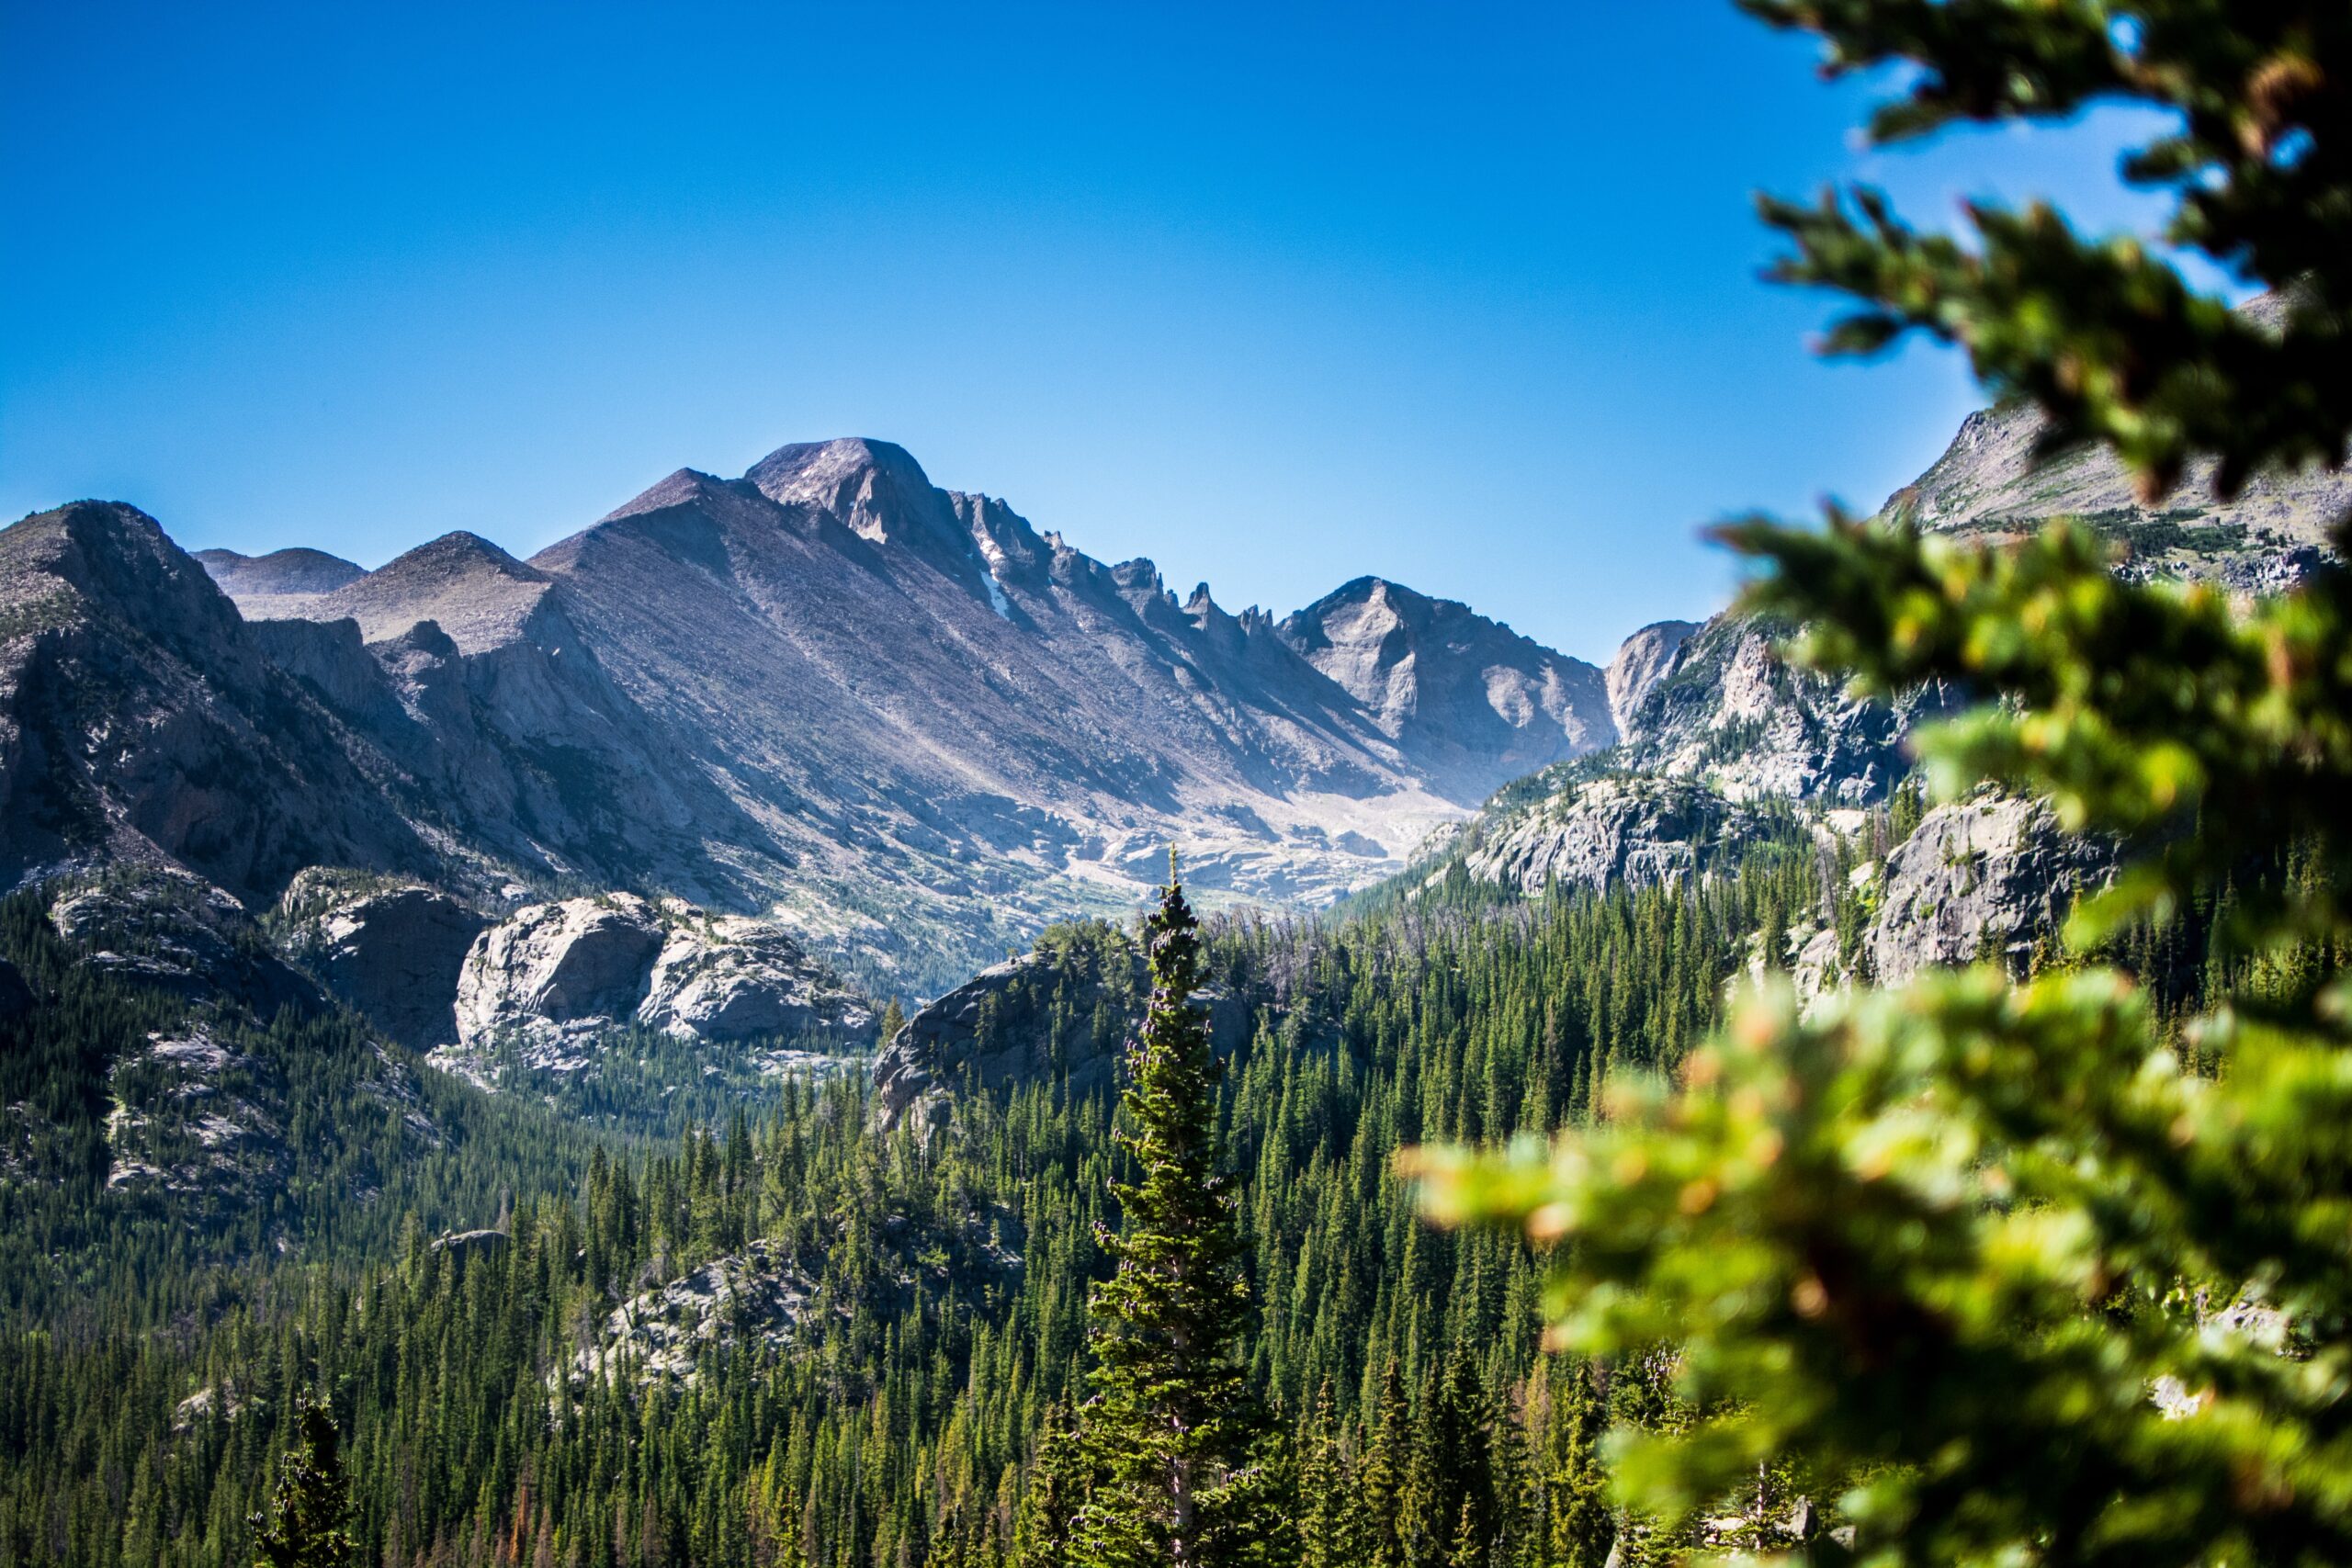 A photograph of a summer mountain scape with blue skies.